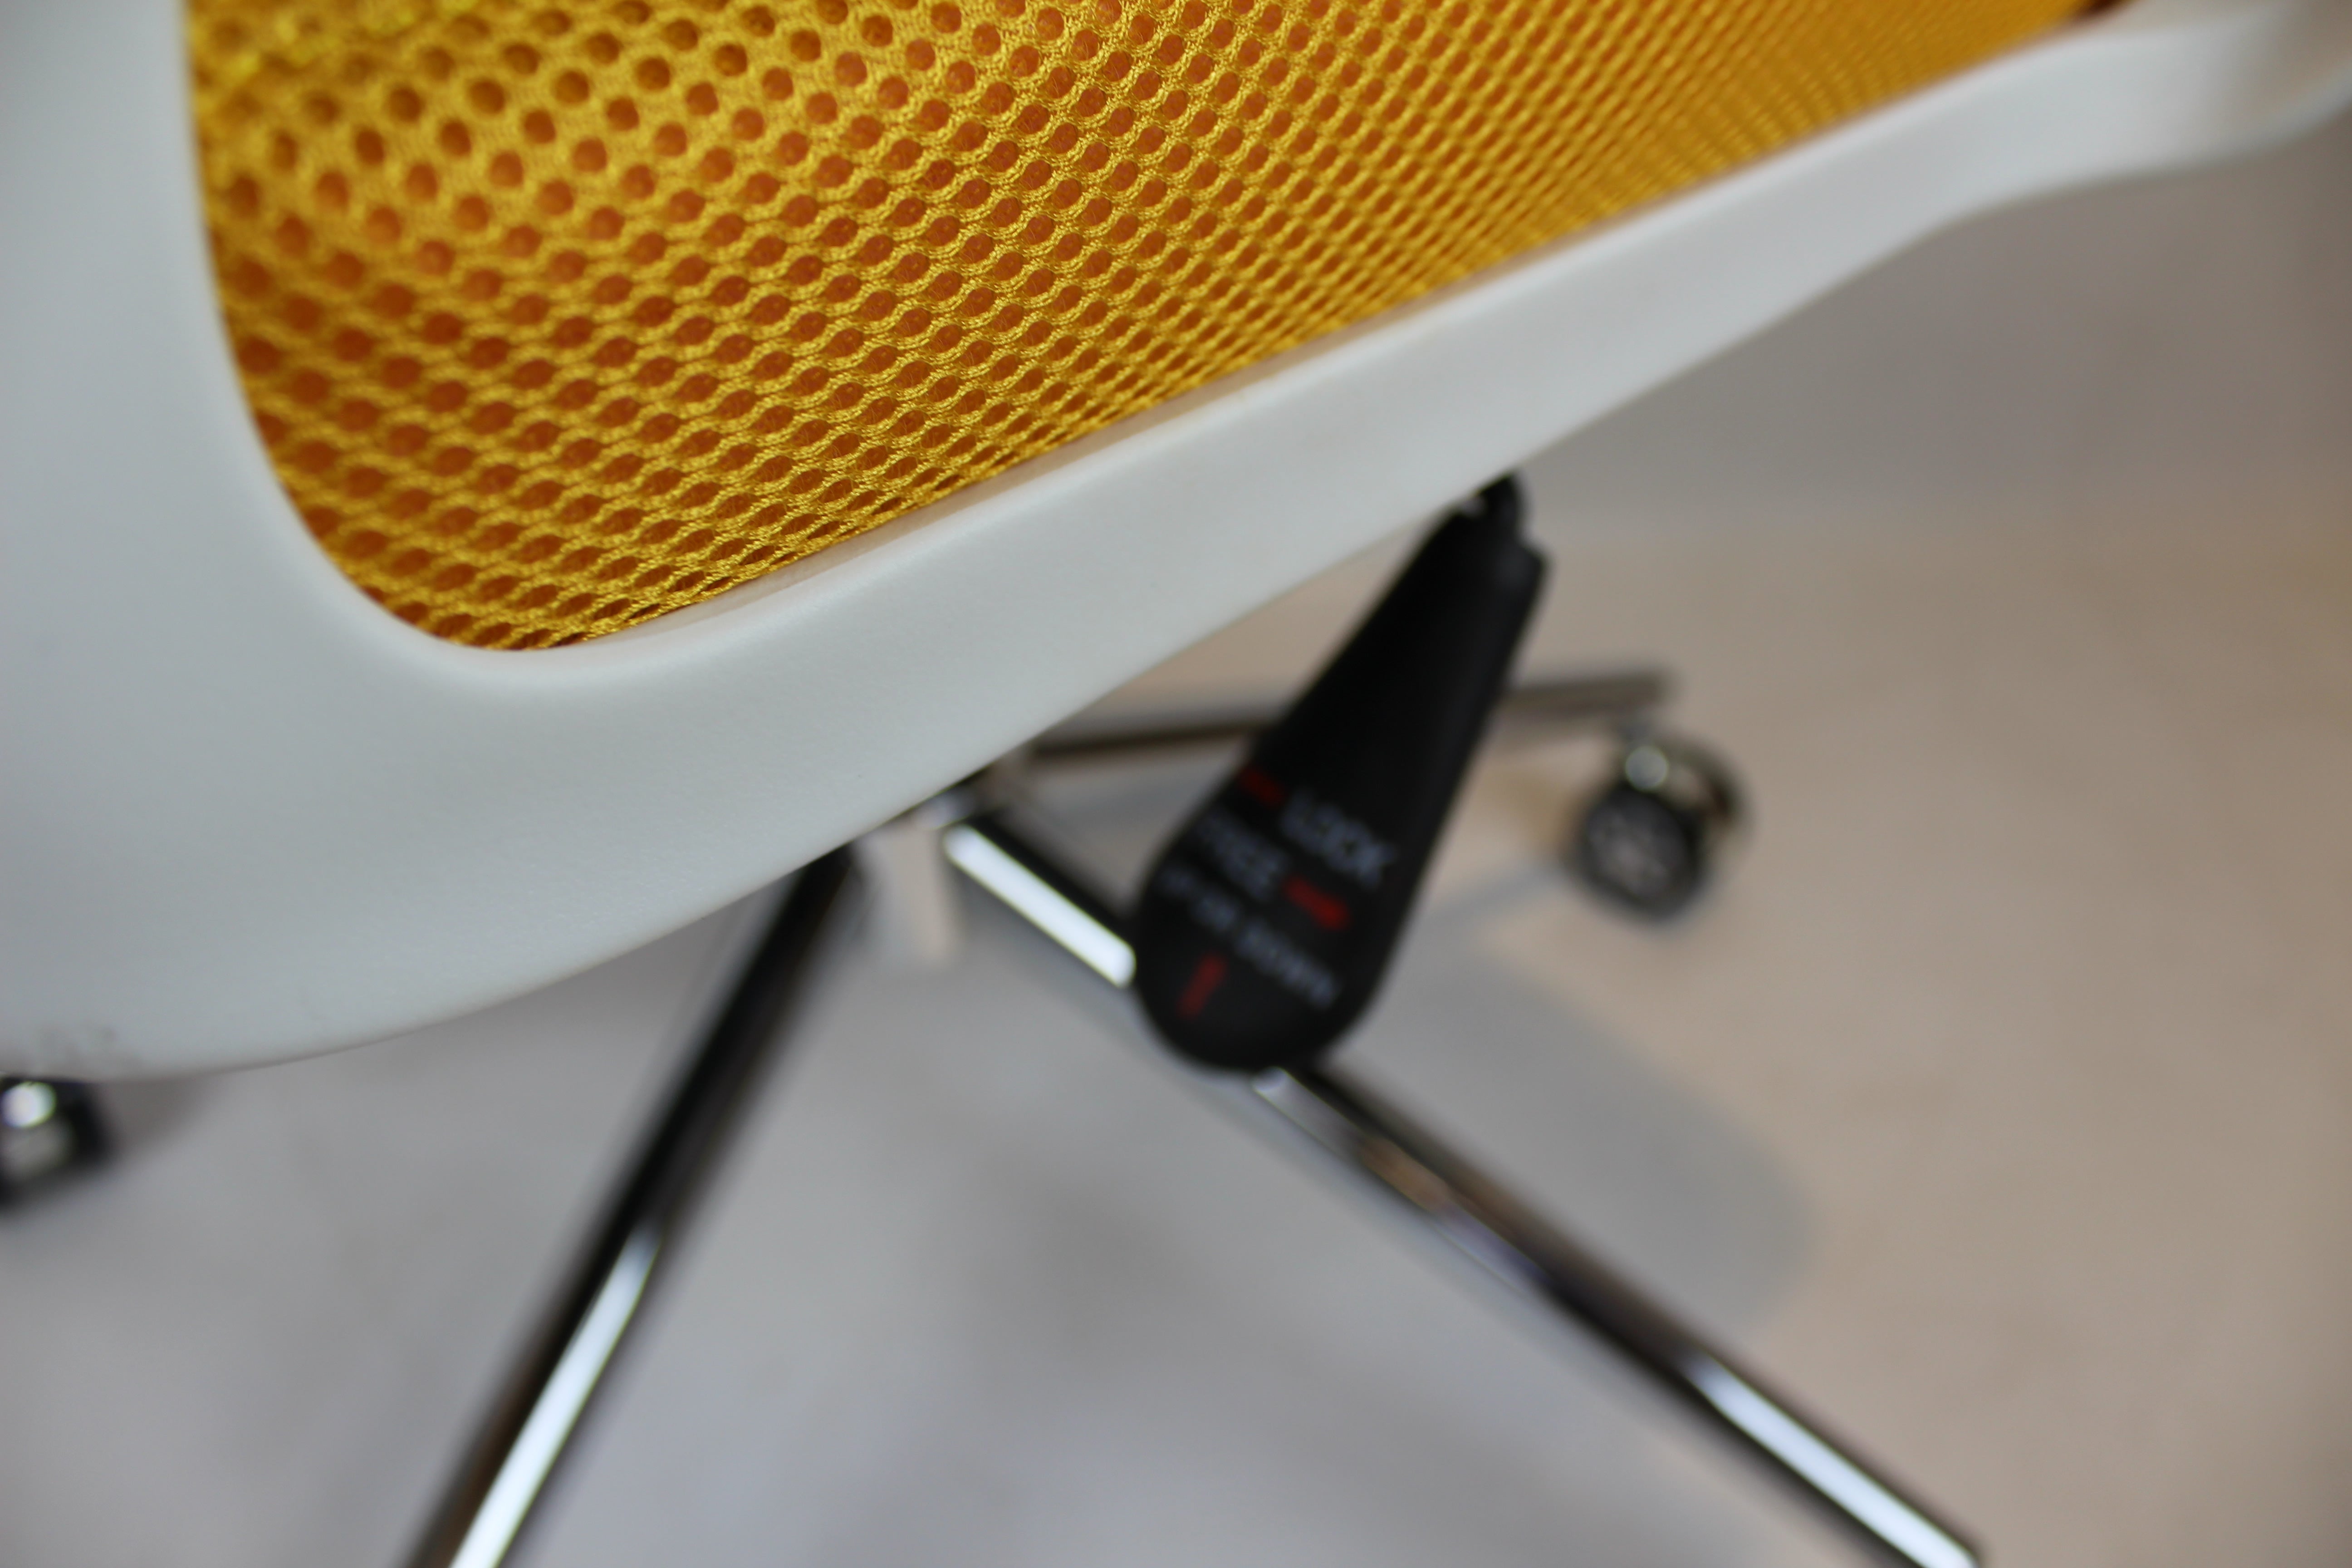 Modern Office Chair with Yellow Mesh - DH-086